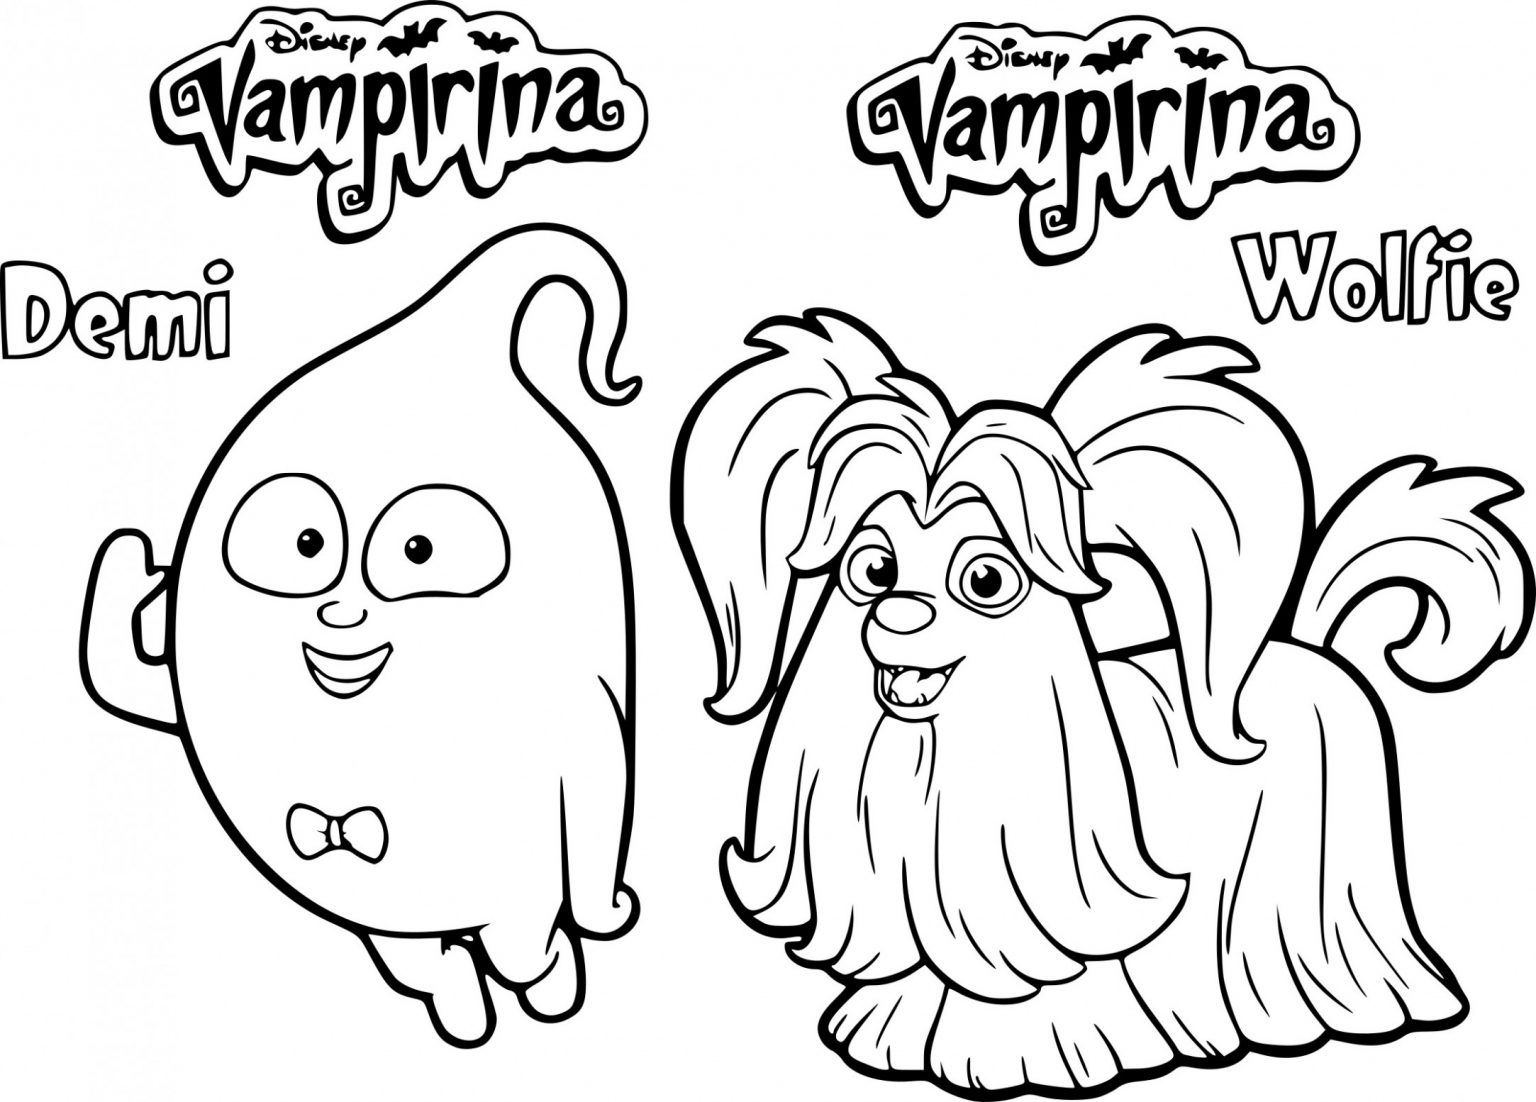 vampirina coloring pages to do online